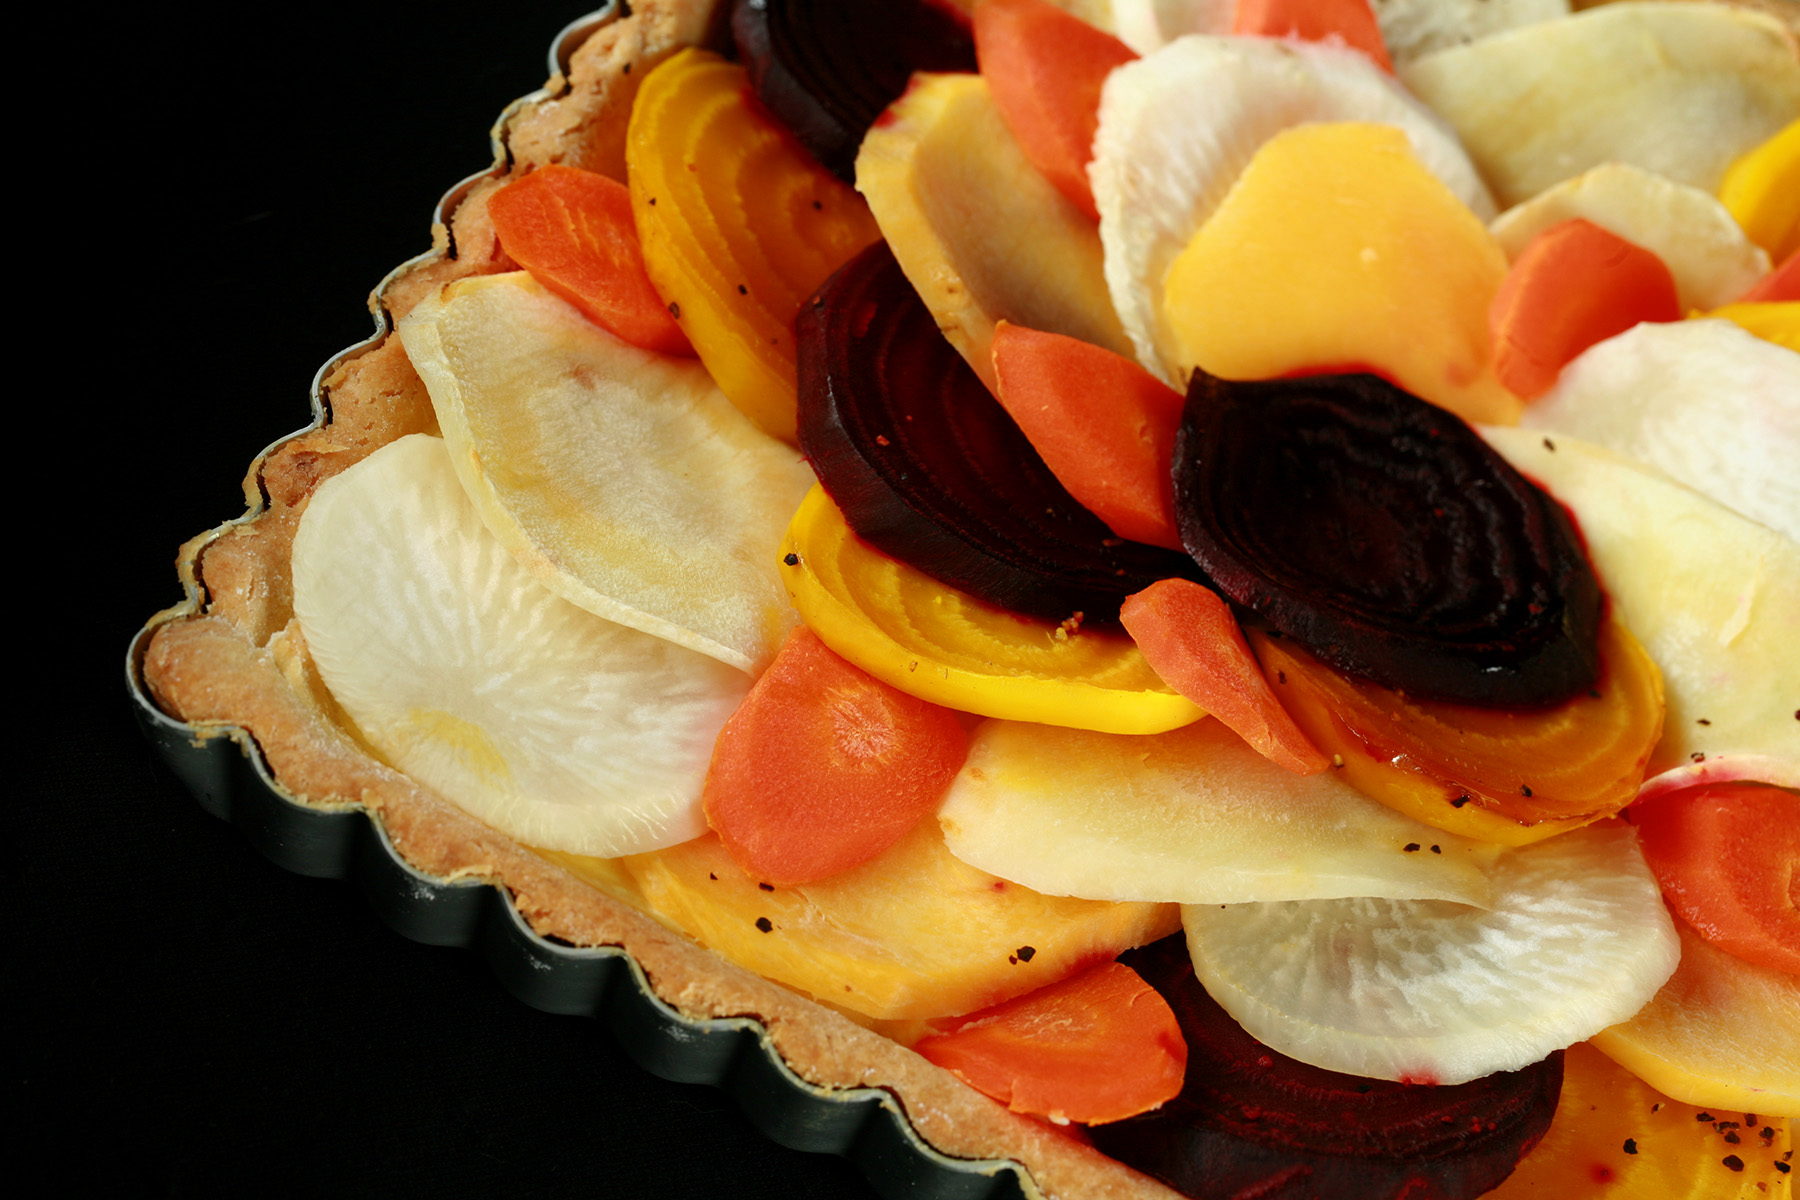 A close up view of a square root tart - a tart cooked in a square pan, with slices of a variety of root veggies arranged on top.